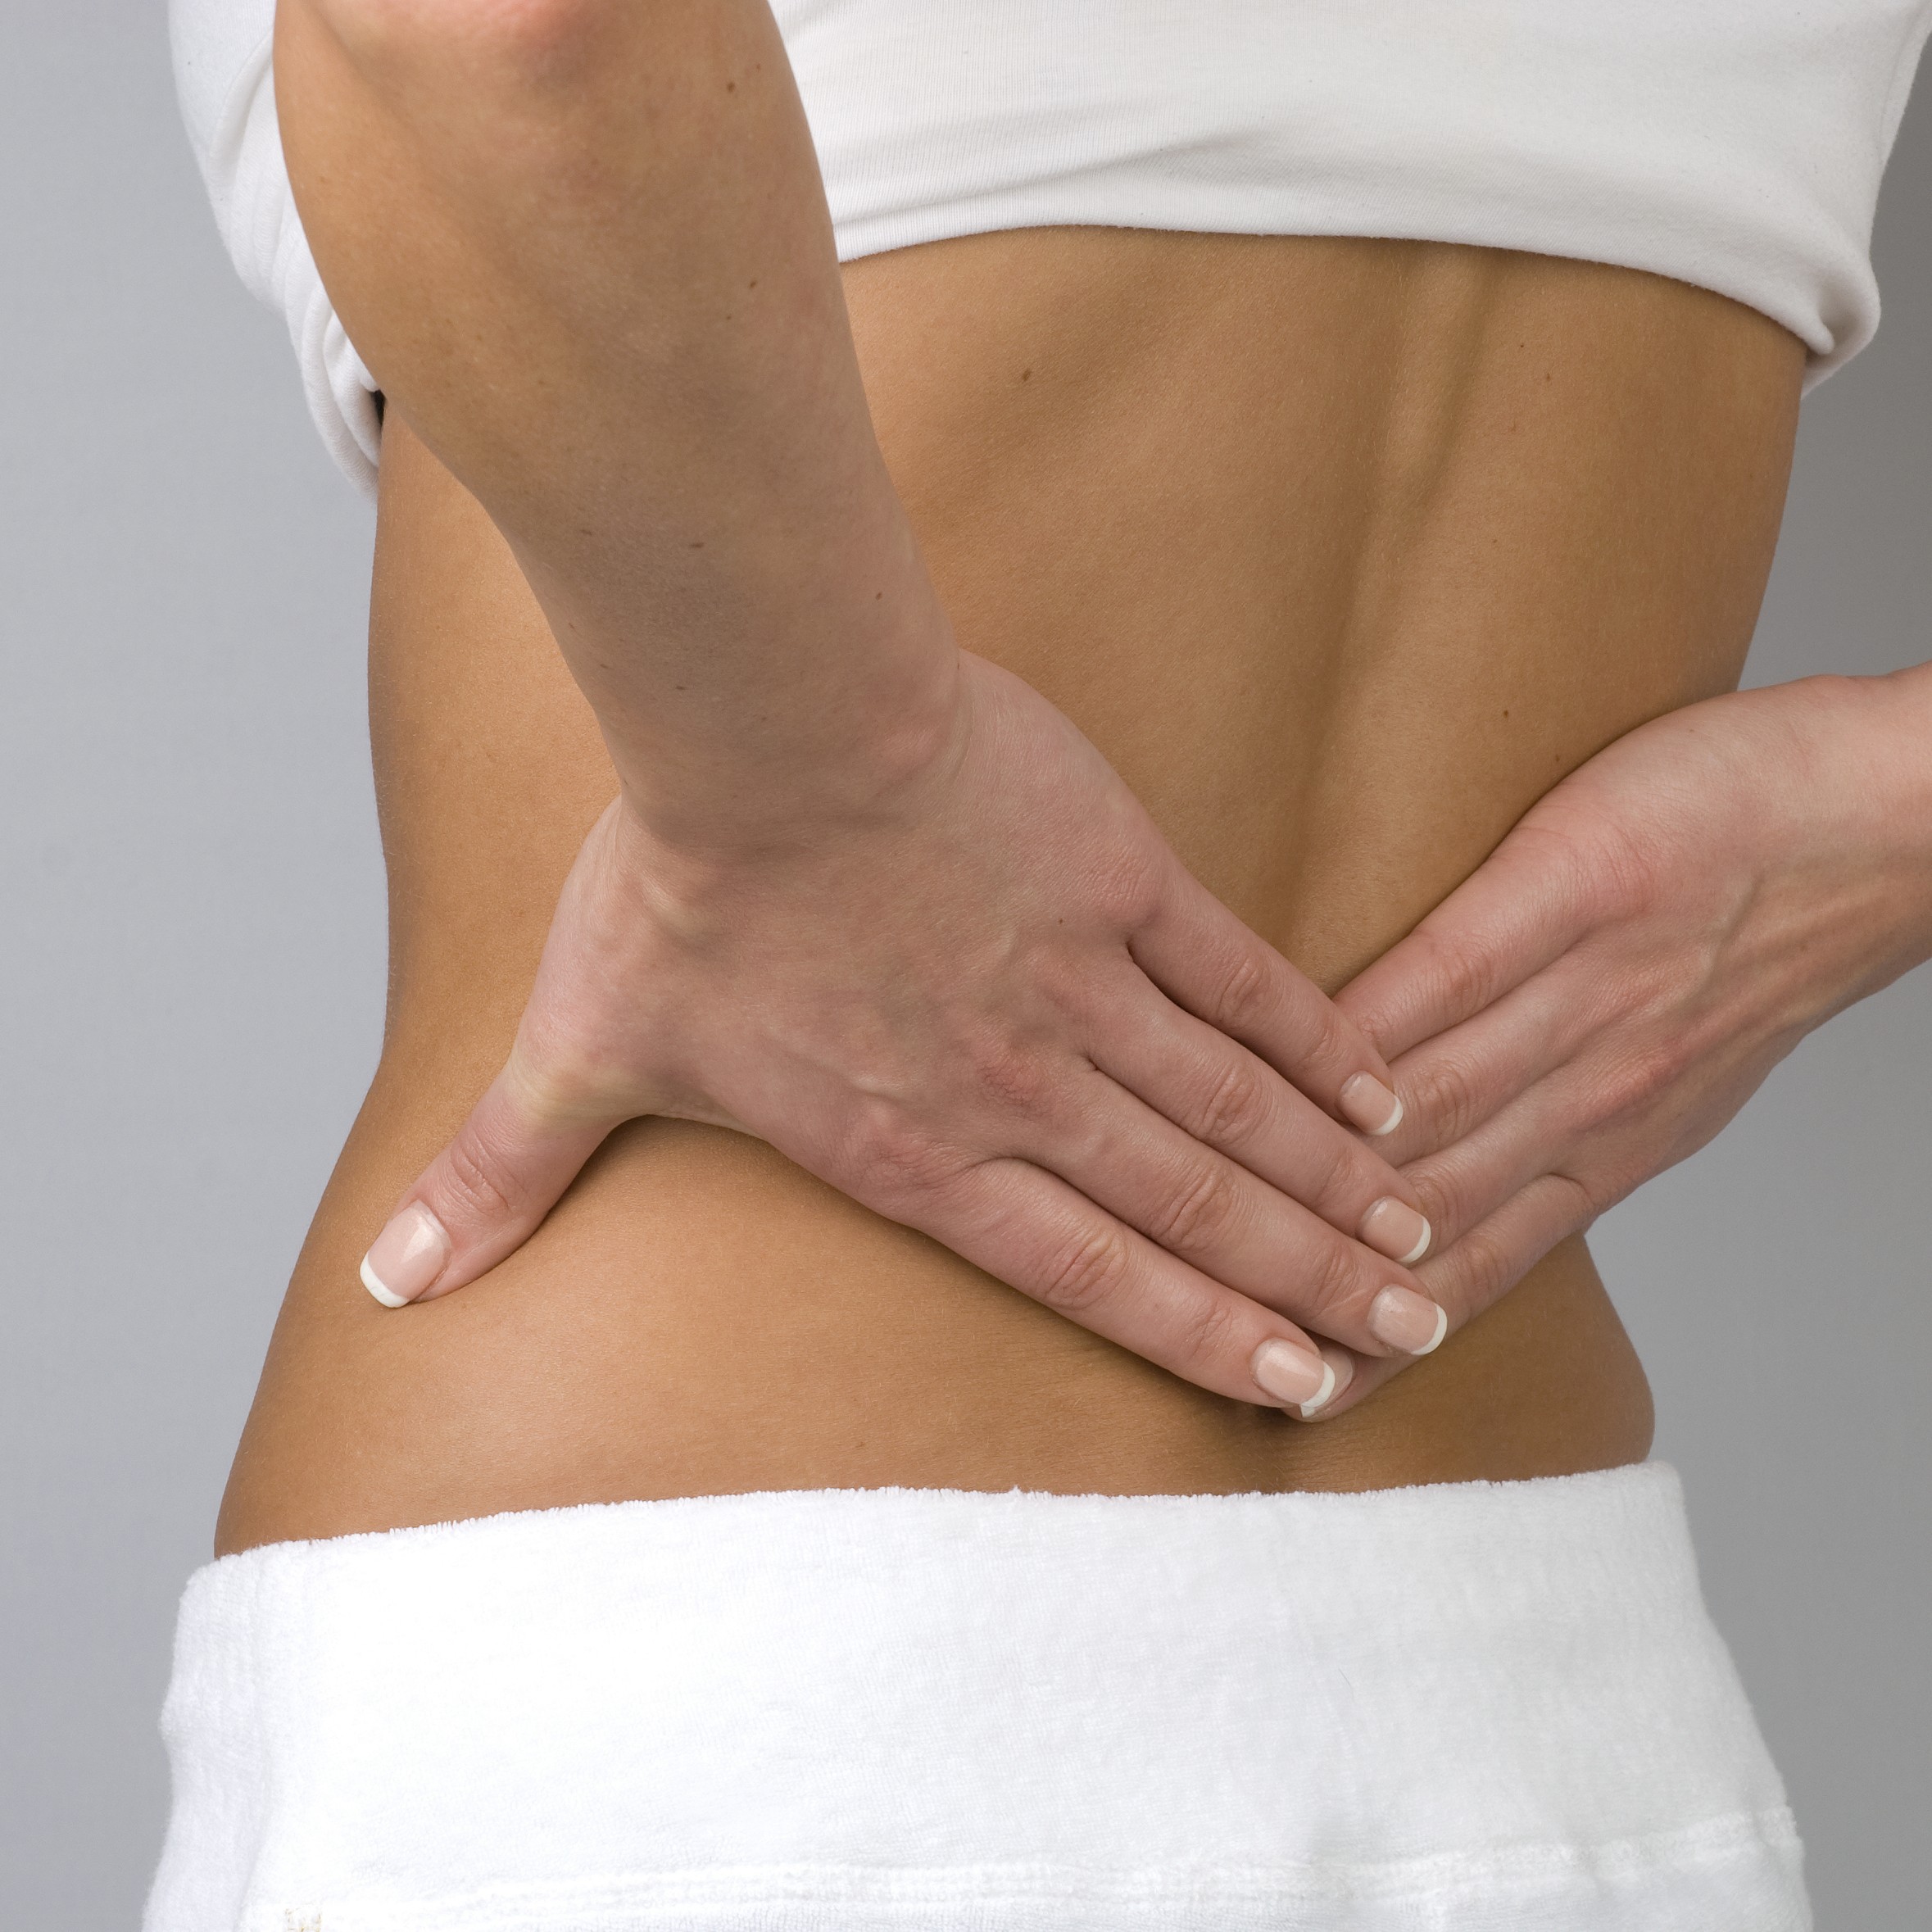 Woman's hands pressing against her lower back suggesting pain.